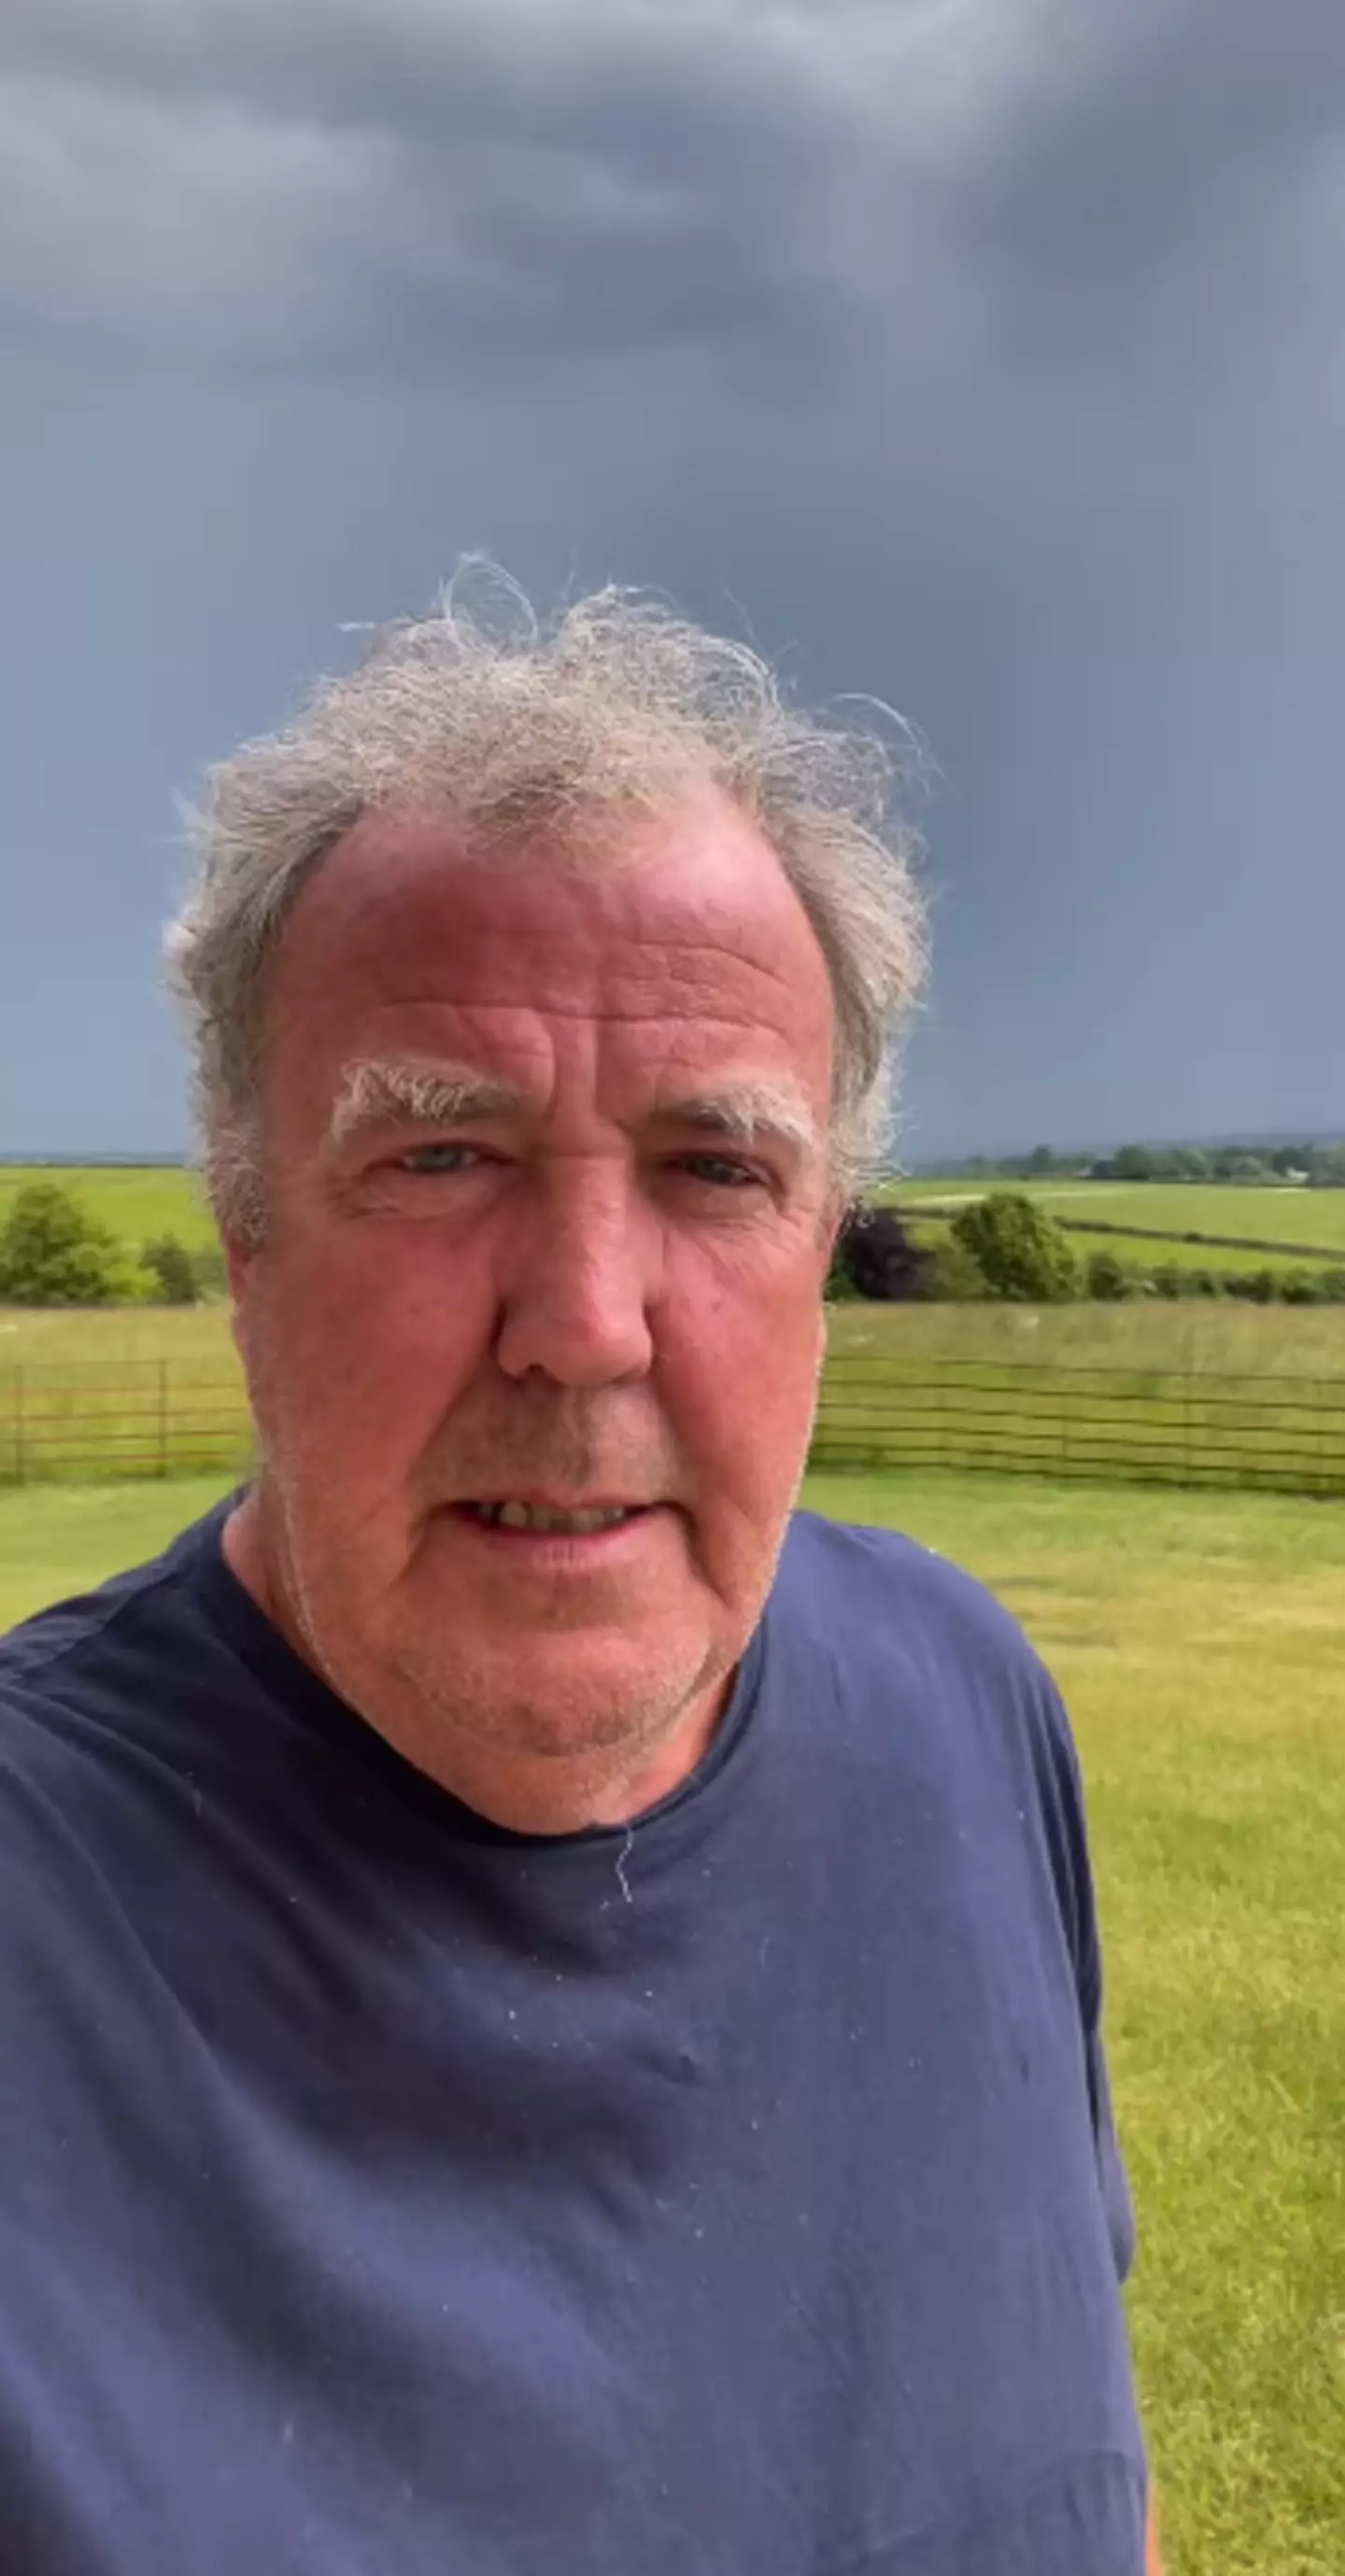 Jeremy Clarkson put out an urgent plea on his Twitter.